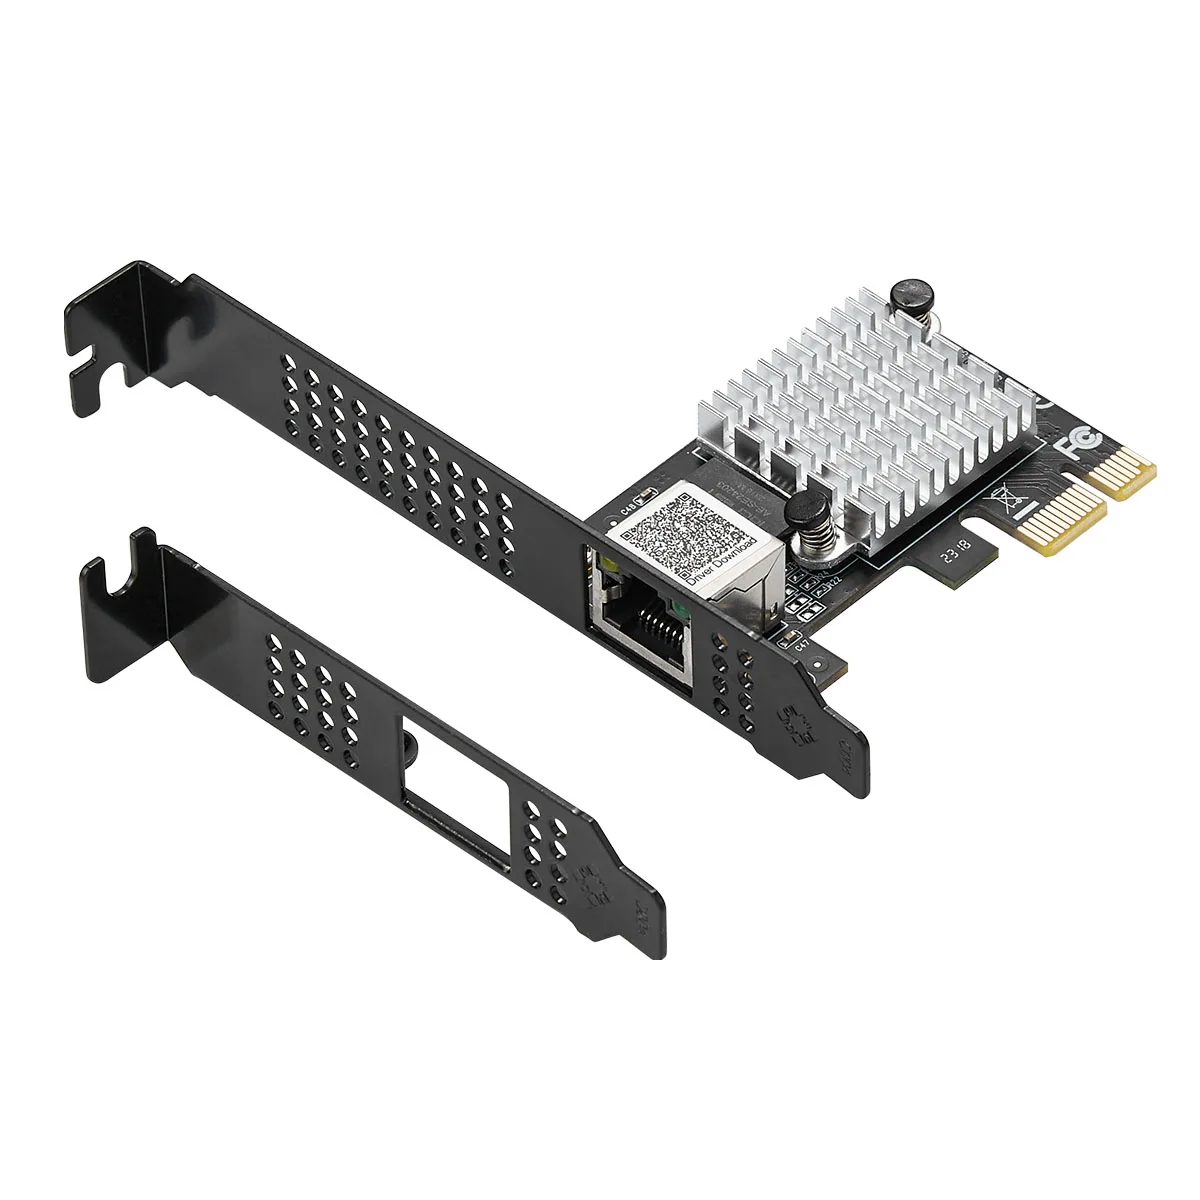 Pci Rtl8125b Network Card | Ethernet Adapter 10 Pcie | Network 